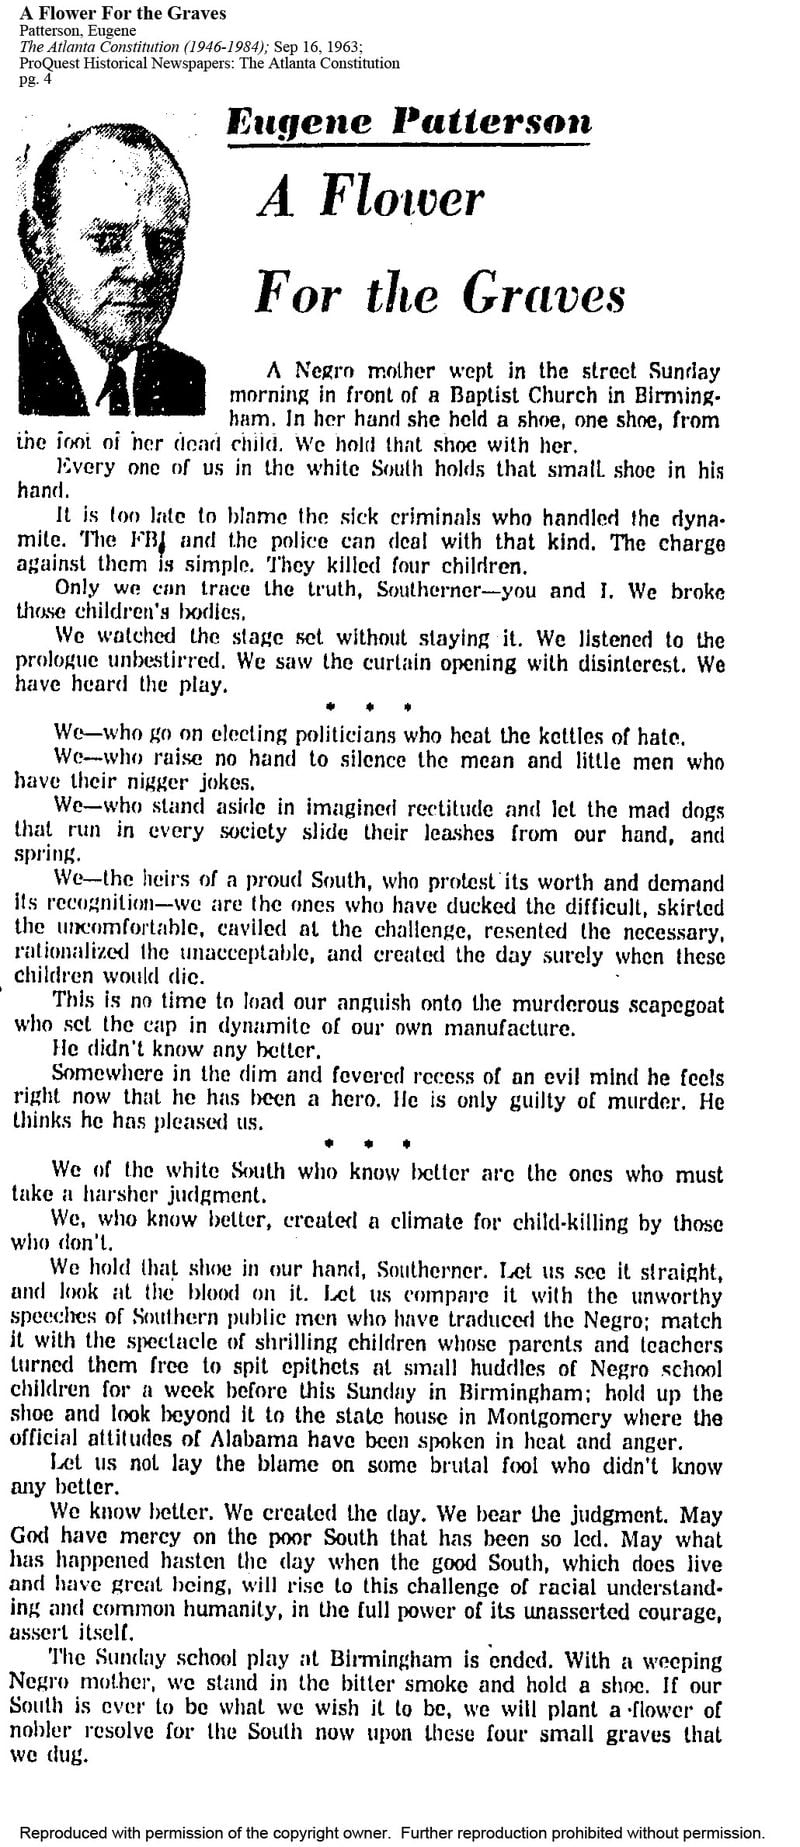 Atlanta Constitution editor Gene Patterson published the column "A Flower For the Graves" on Sept. 16, 1963, one day after the church bombing in Birmingham that killed four little girls.